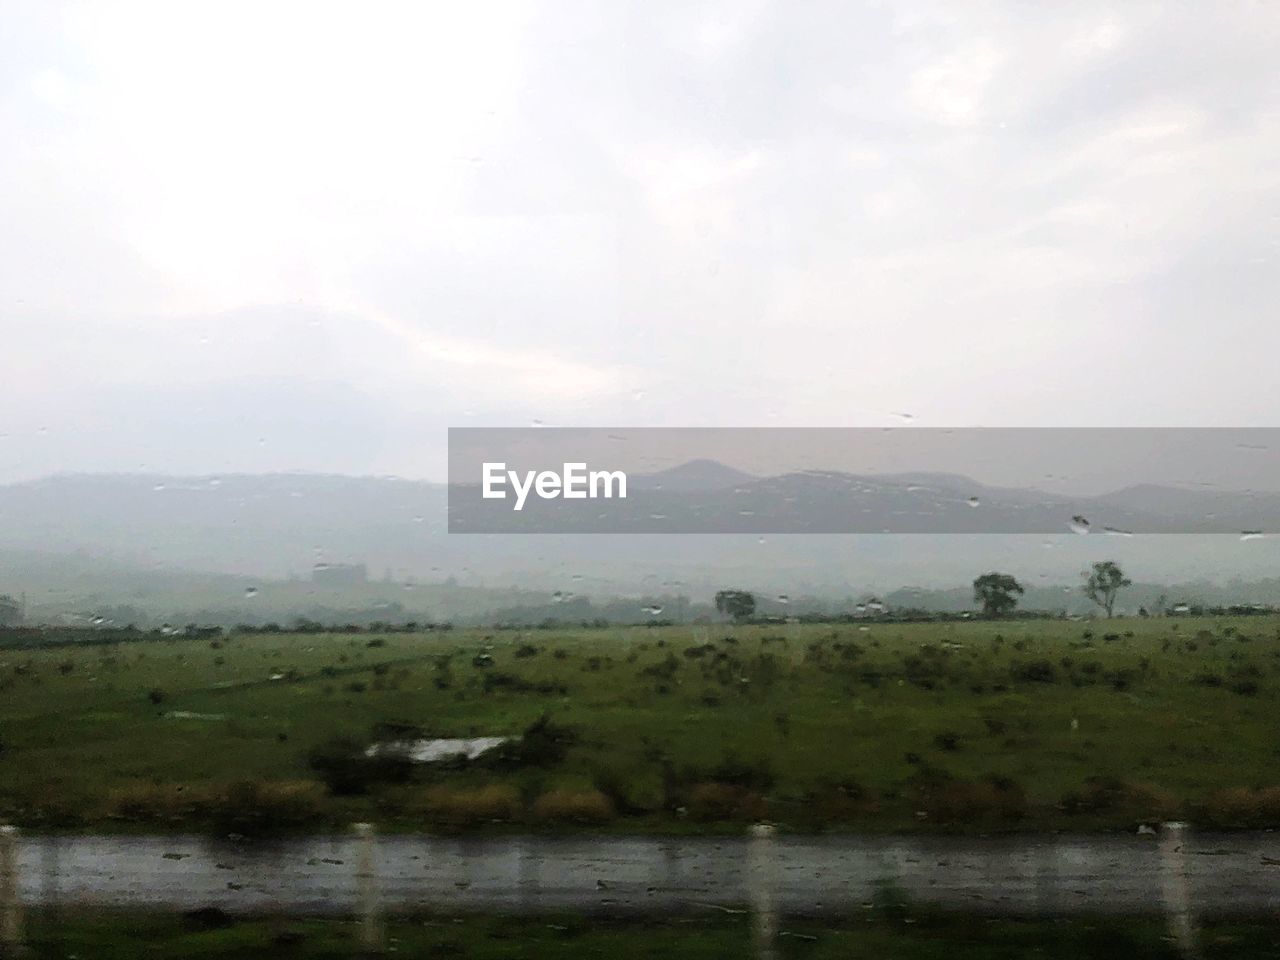 SCENIC VIEW OF LANDSCAPE DURING RAINY SEASON